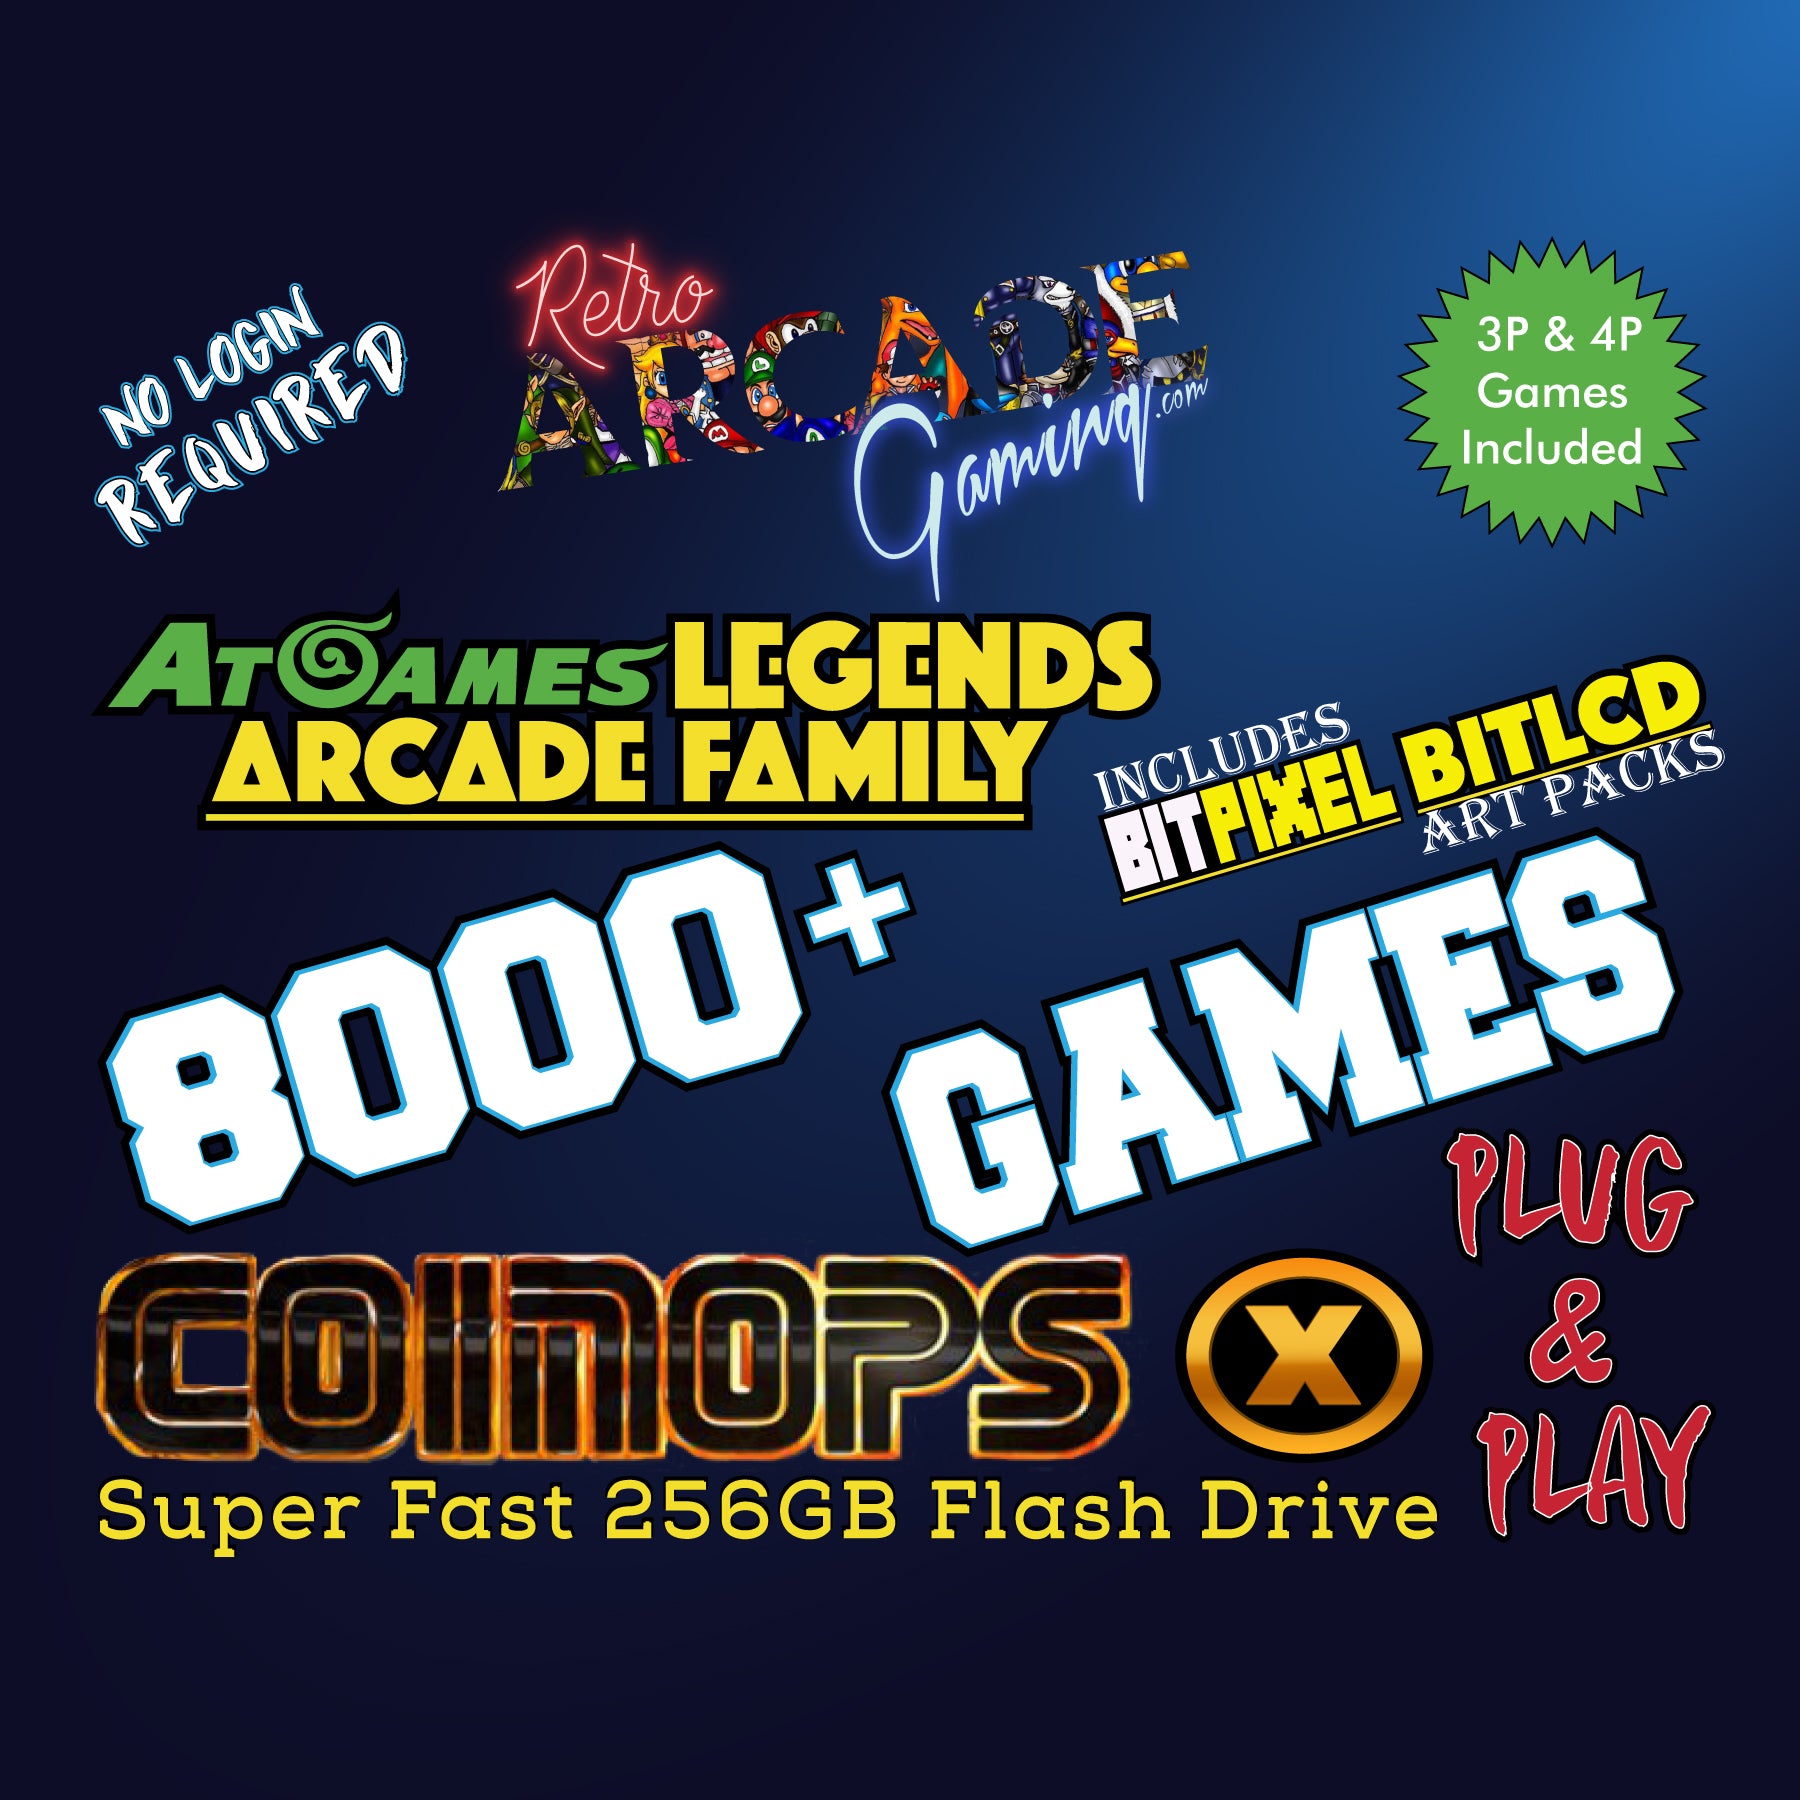 8000+ Add-On Pack! AtGames Legends Ultimate Family! CoinopsX 256GB Plug N Play Flash Drive!